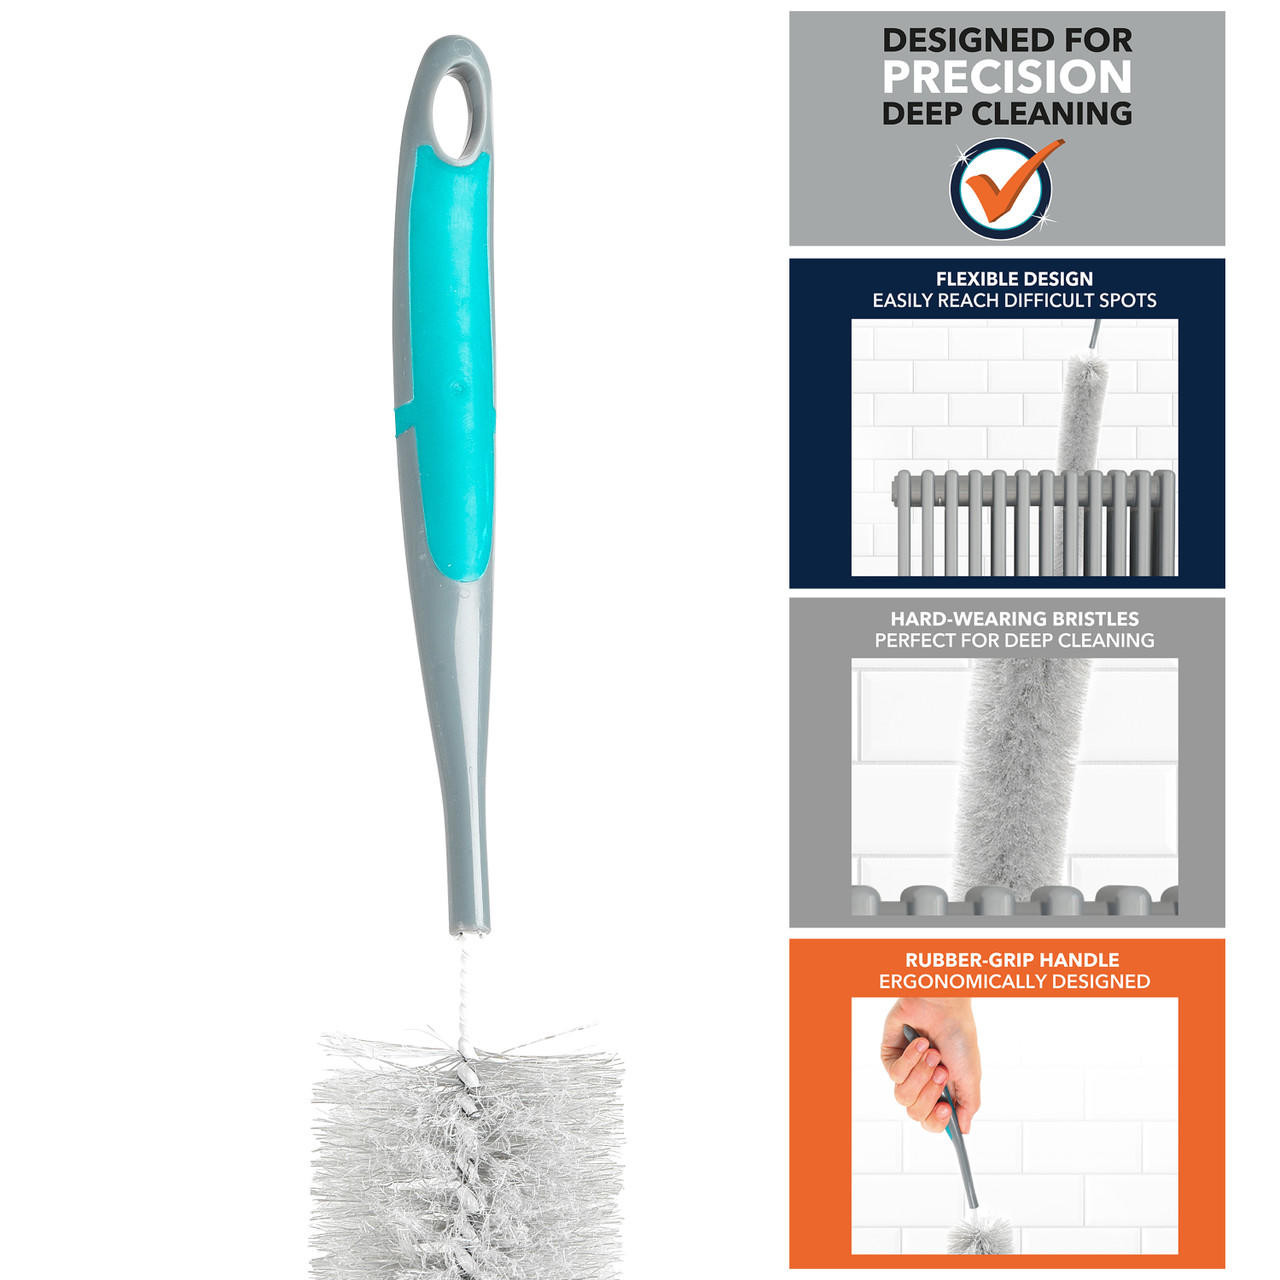 https://cdn11.bigcommerce.com/s-lm3kf40fnq/images/stencil/1280x1280/products/844/6308/deep-clean-radiator-brush-or-reaches-up-to-60-cm-beldray-la077653eu7-5053191077653__08649.1658499638.jpg?c=1